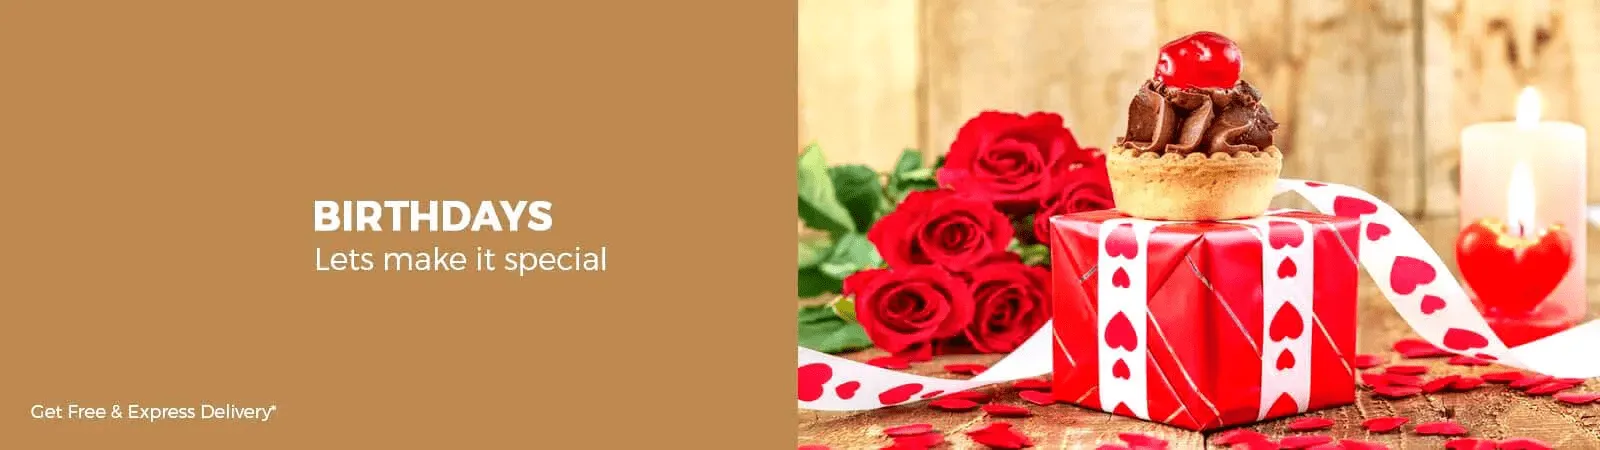 Online flower delivery in India